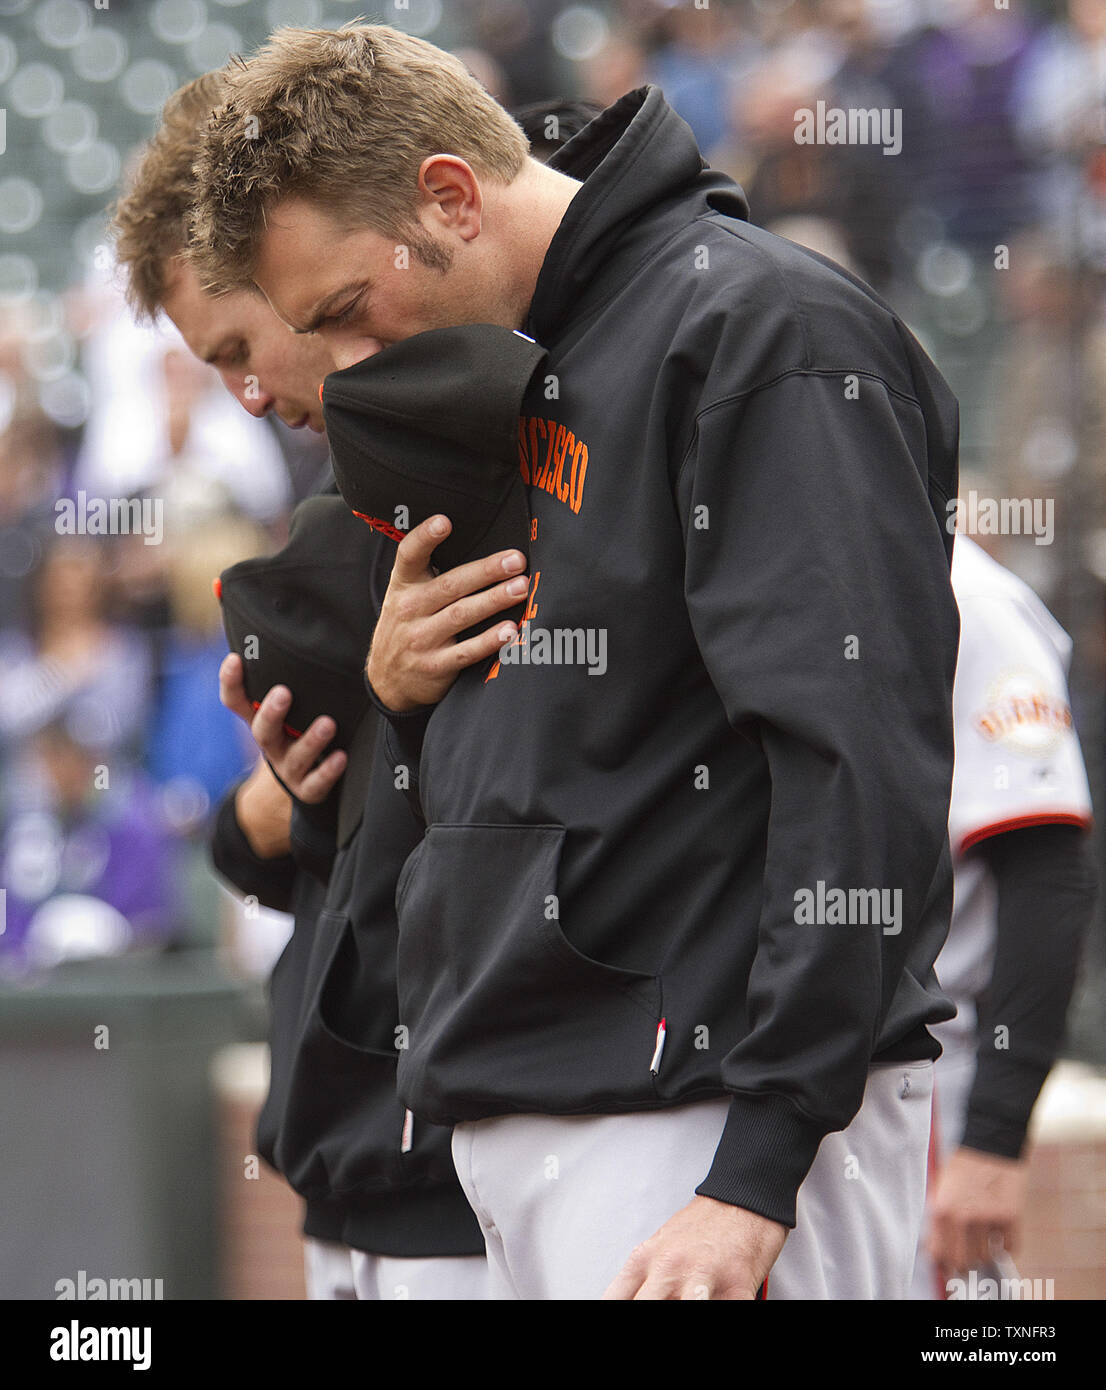 Members of the San Francisco Giants pause for a moment of silence for baseball great Harmon Killebrew, who passed away, at Coors Field in Denver on May 17, 2011.    UPI/Gary C. Caskey Stock Photo